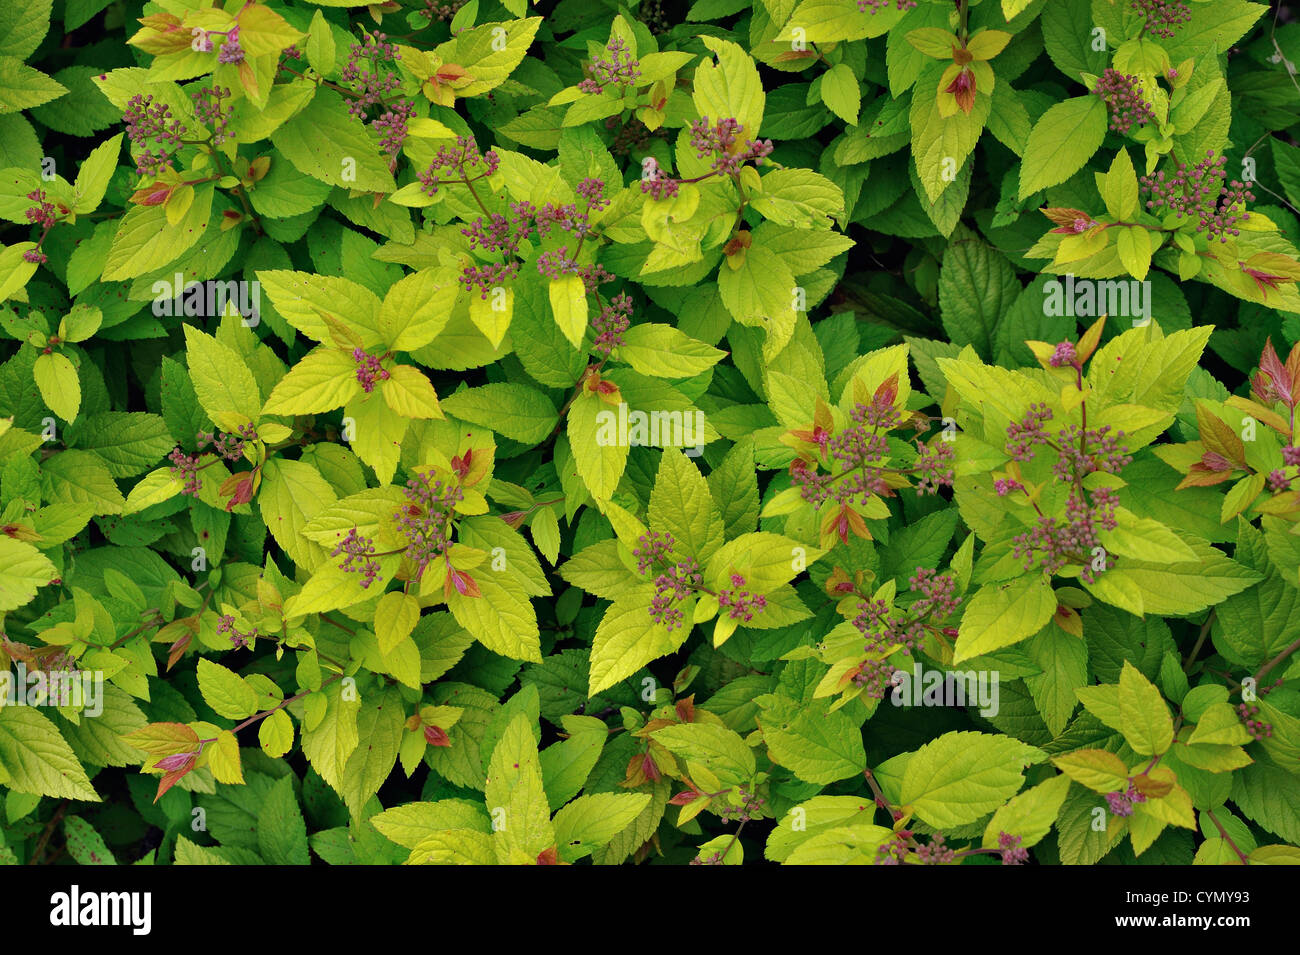 Spirea leaves and flowers Stock Photo